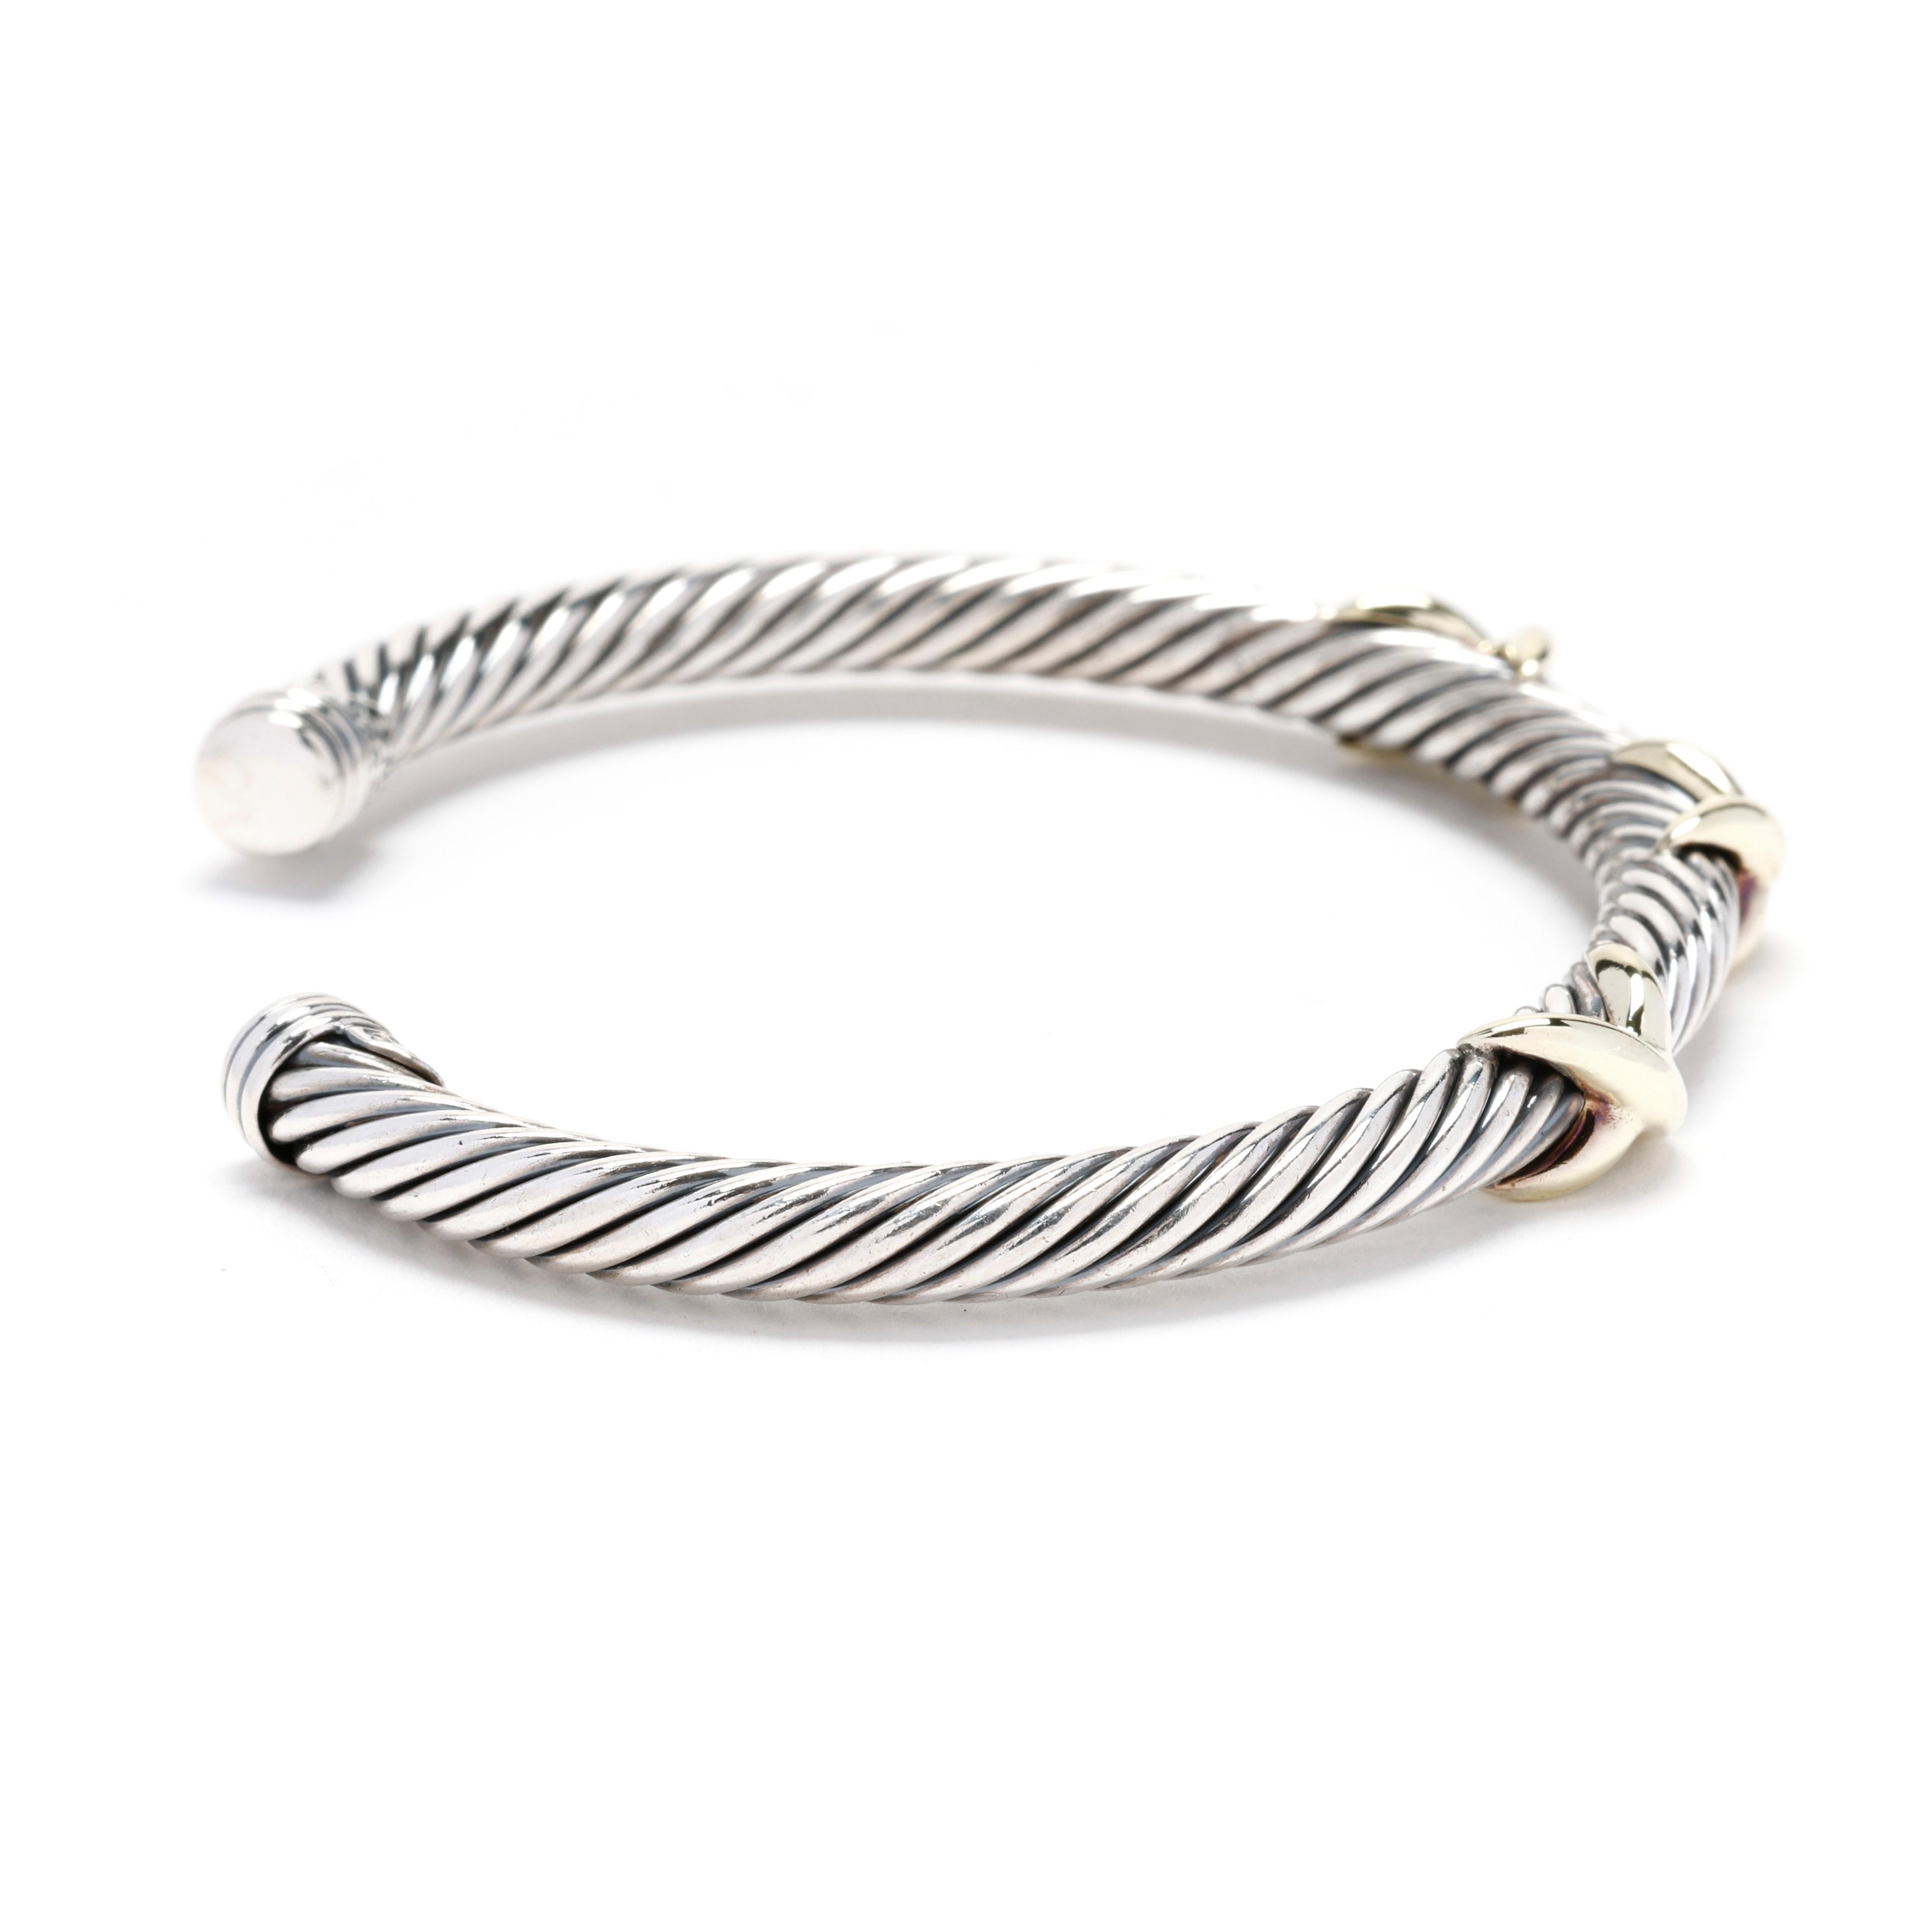 A David Yurman sterling silver 14 karat yellow gold and sterling silver triple X cable cuff bracelet. This cuff bracelet features a silver cable motif cuff with a gold triple X accent.



Length: 6.25 in.; adjustable



DY Size Medium



Width: 7.1